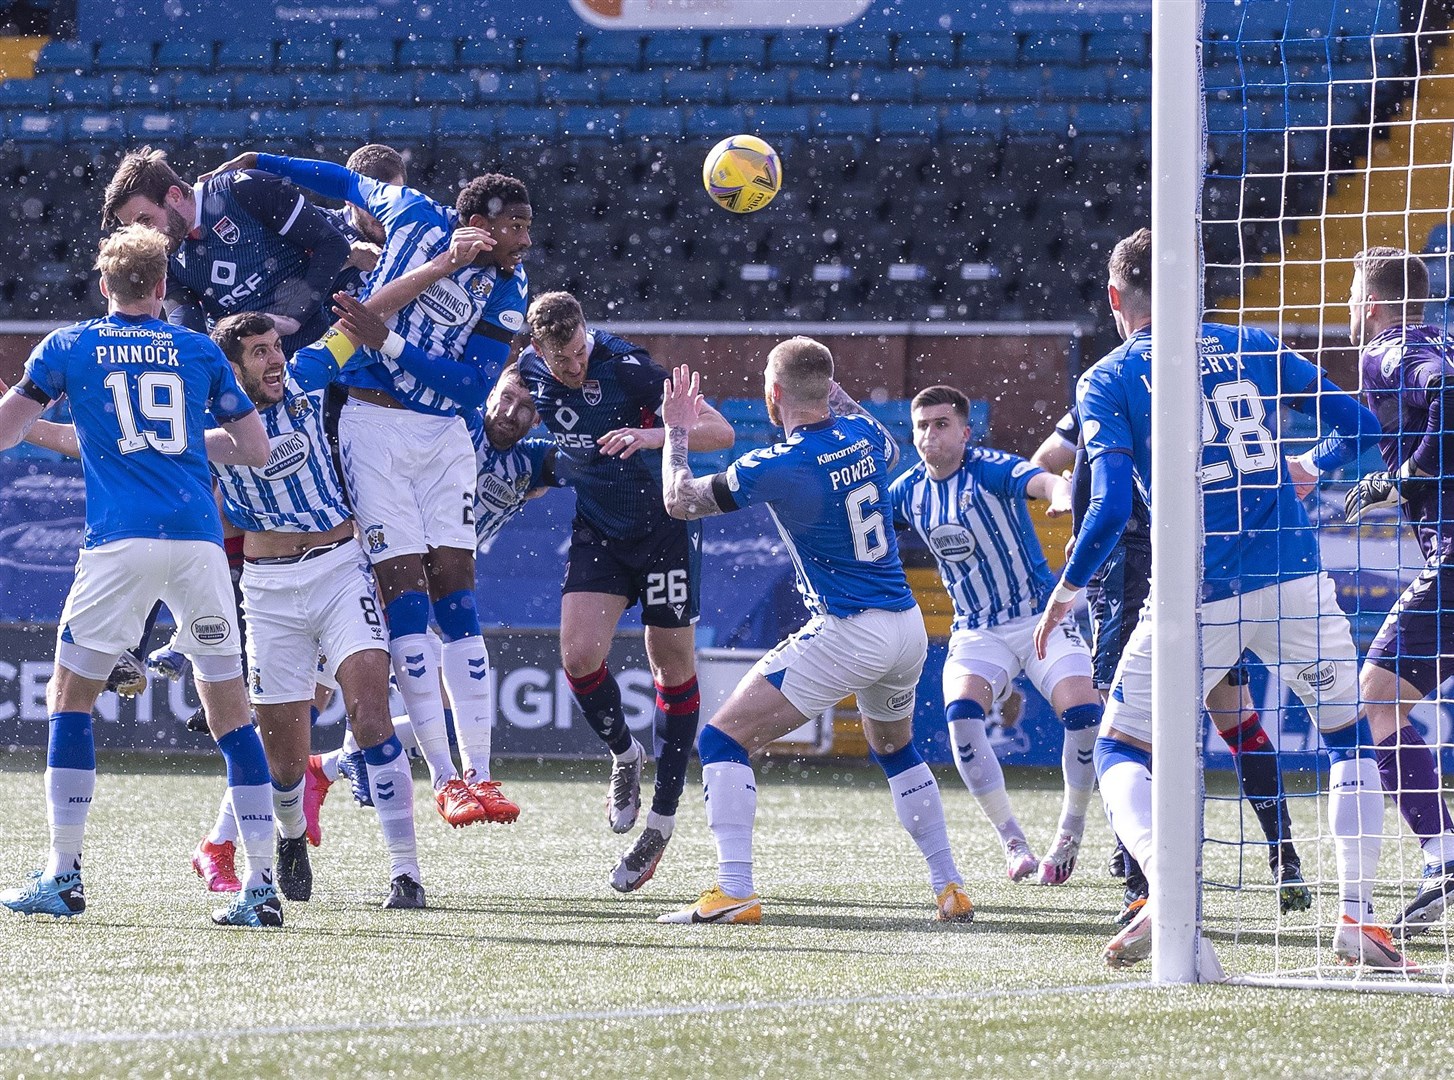 Picture - Ken Macpherson, Inverness. Kilmarnock(2) v Ross County(2). 10.04.21. Ross County's Alex Iacovitti heads the equaliser past Kilmarnock 'keeper Colin Doyle.